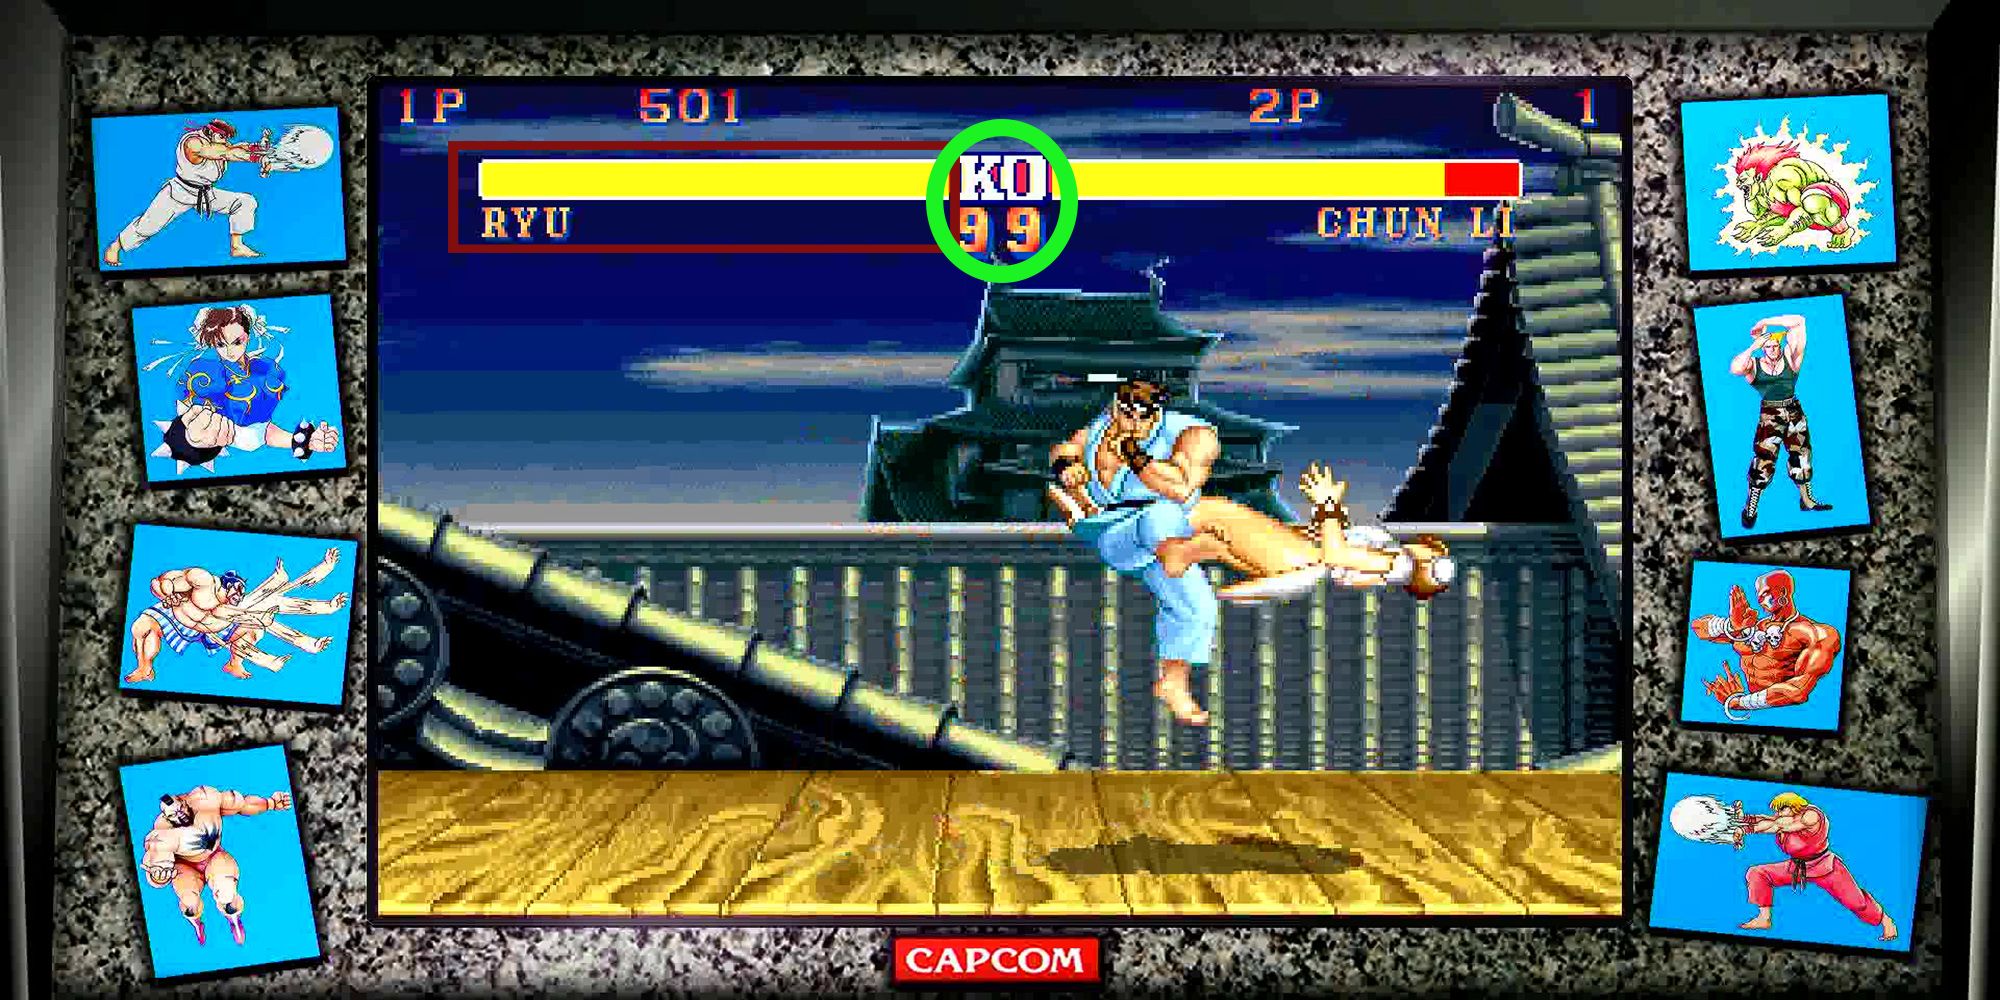 Annotated training mode screenshot from Street Fighter II' Hyper Fighting in Street Fighter 30th Anniversary Collection.